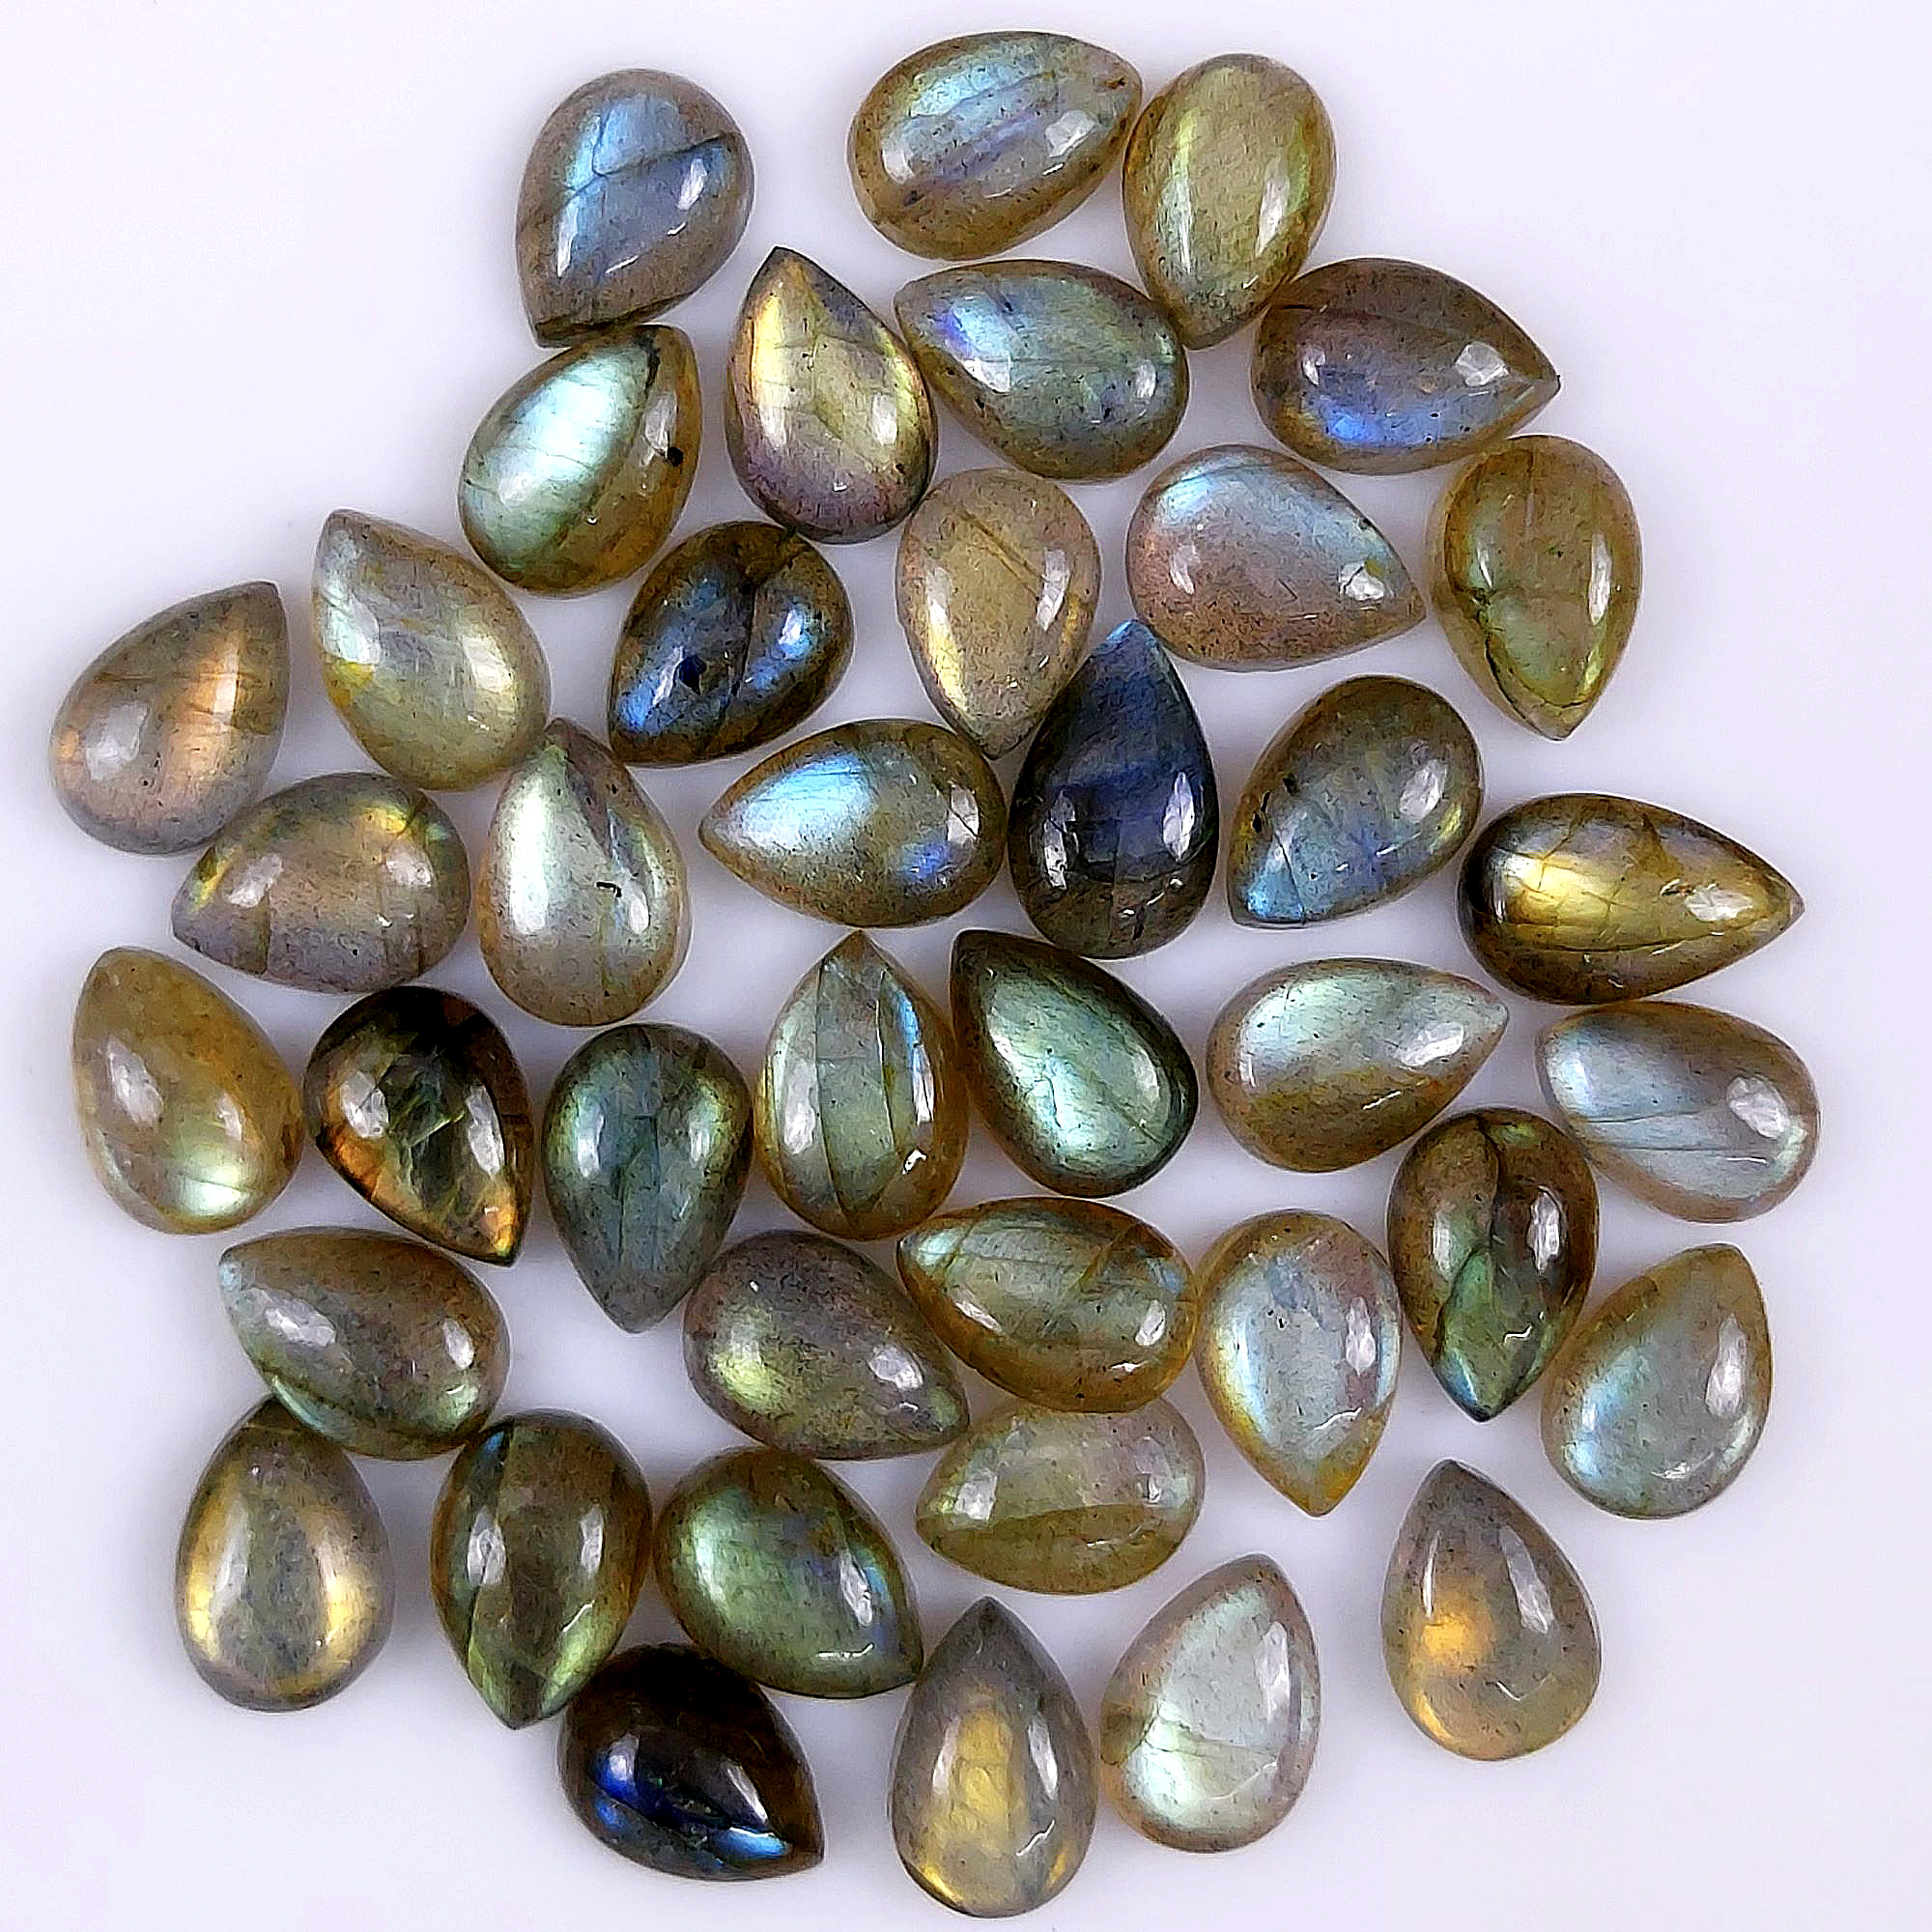 40 Pcs 135Cts Natural Labradorite Cabochon oval Shape Multifire Calibrated Loose Gemstone for jewelry making Wholesale Lots Size14x8 12x8mm#G-1583